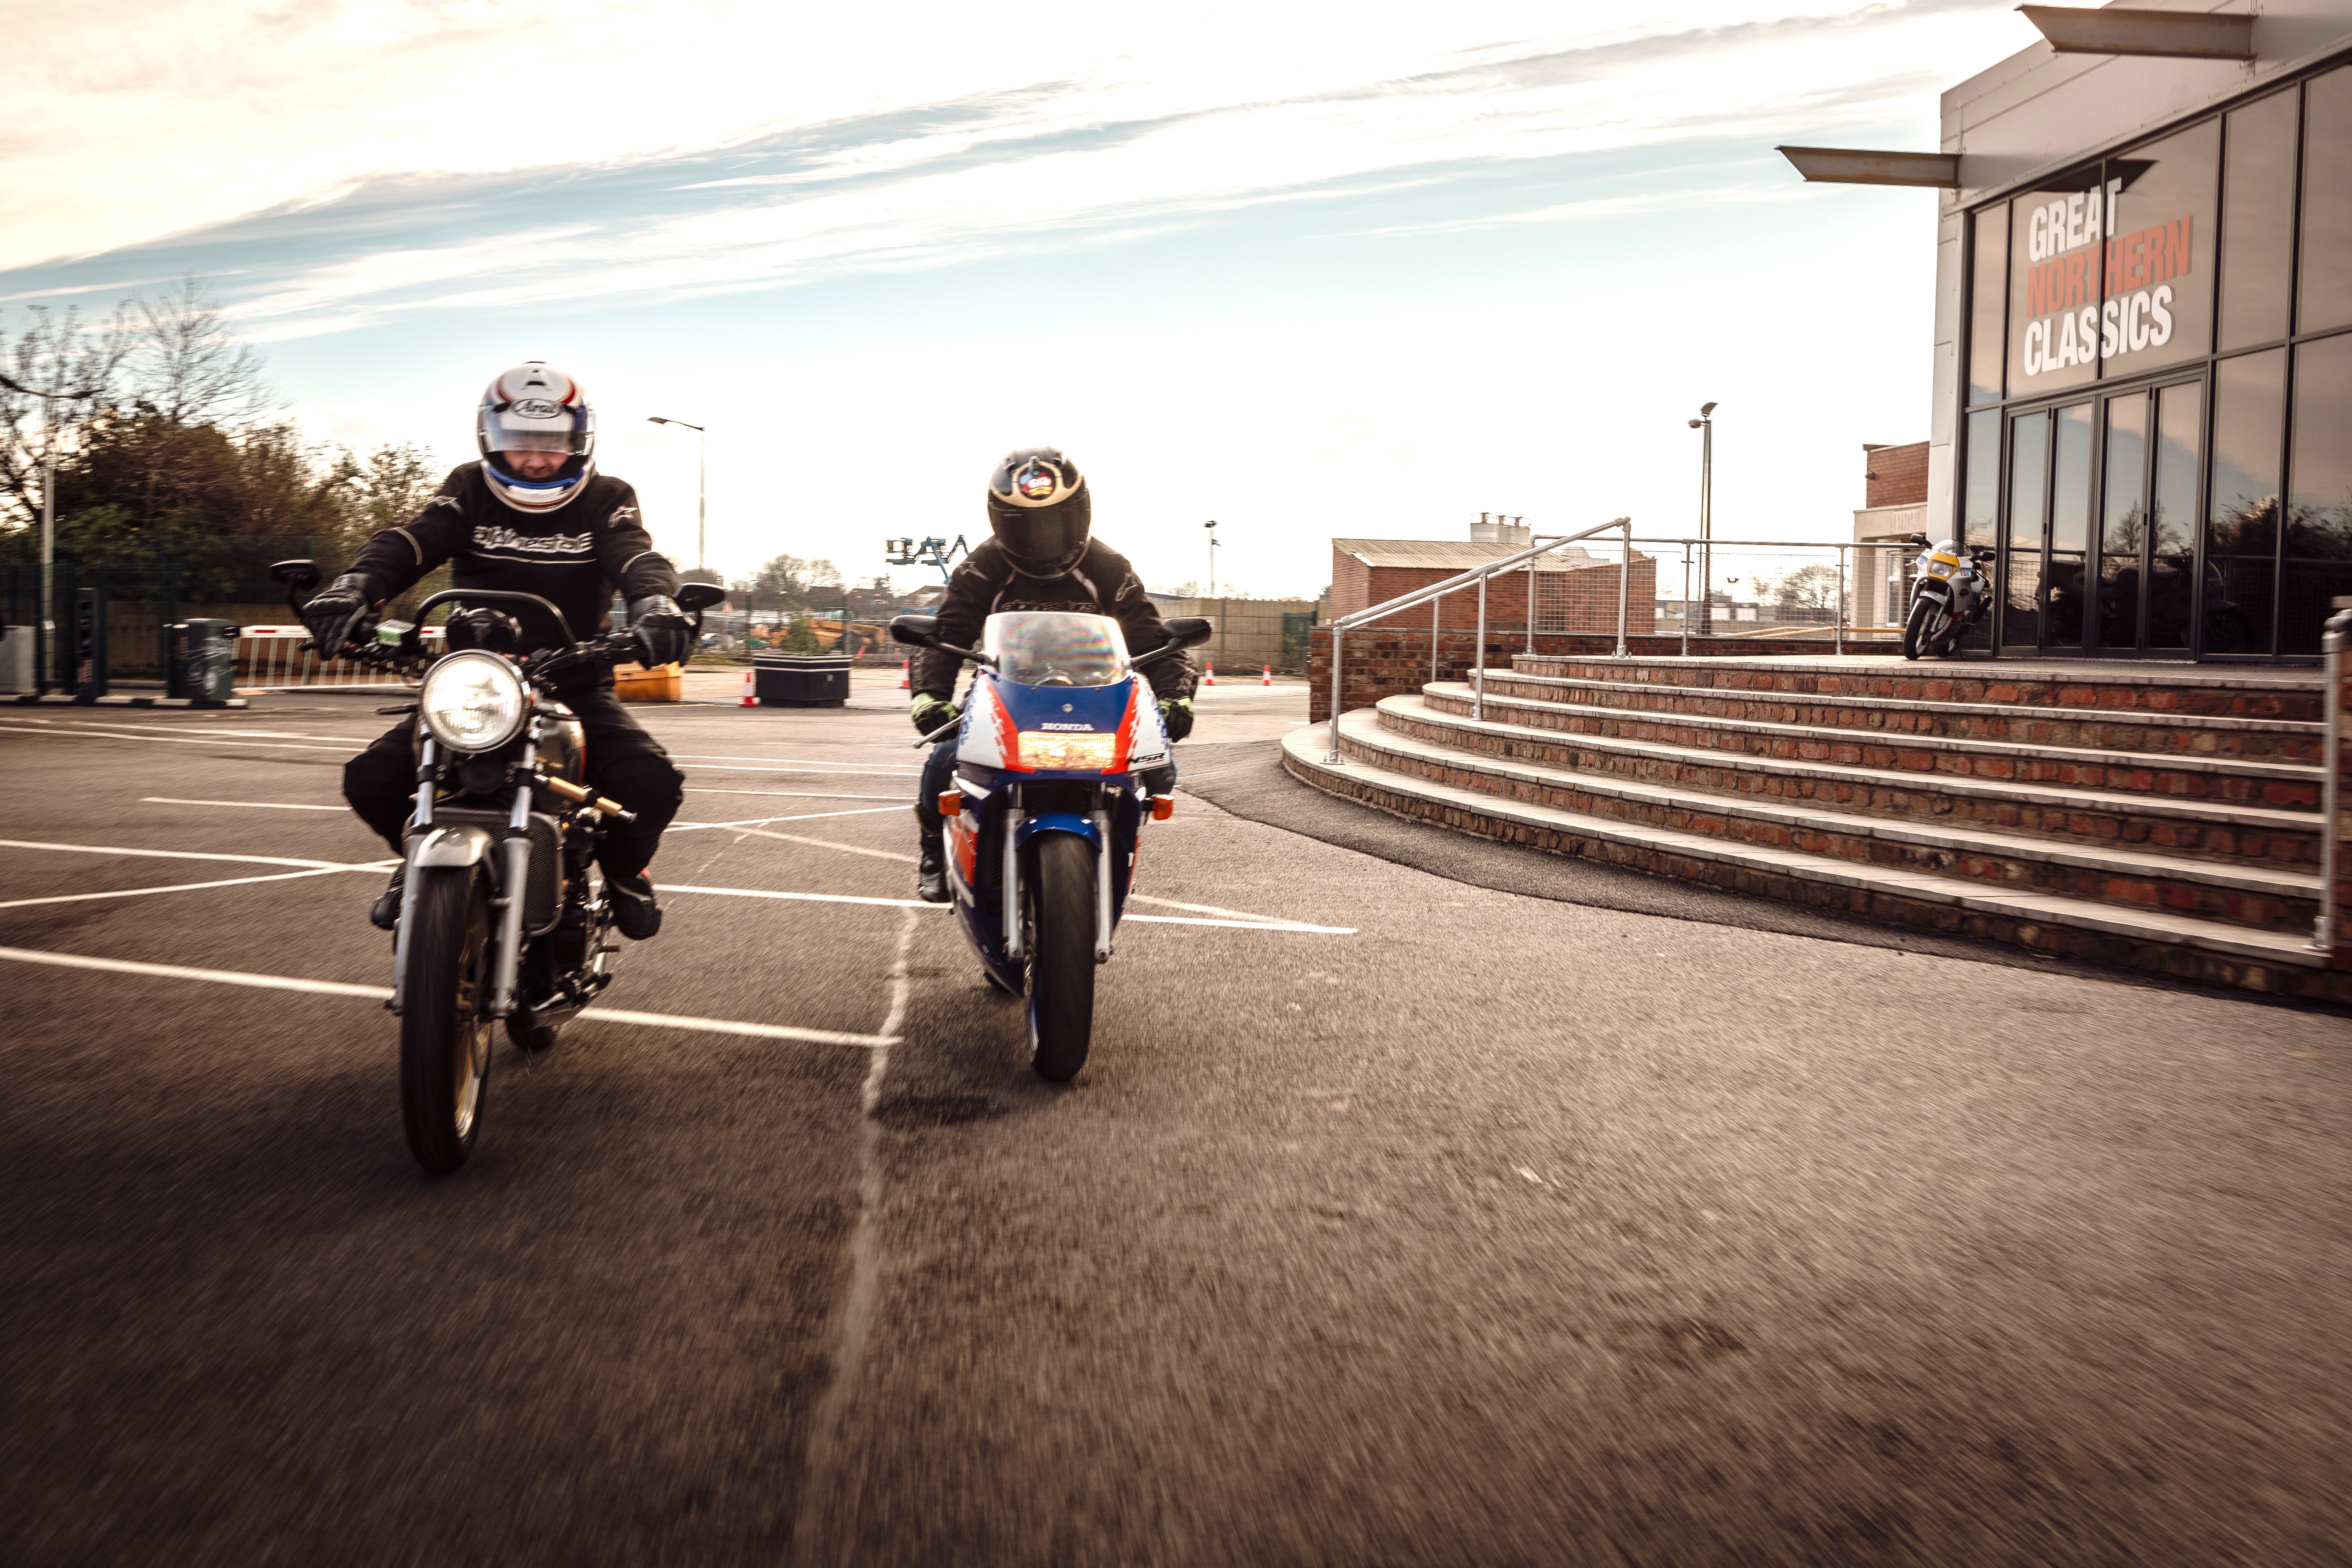 Free Event – Bike Night – Thursday 15th August